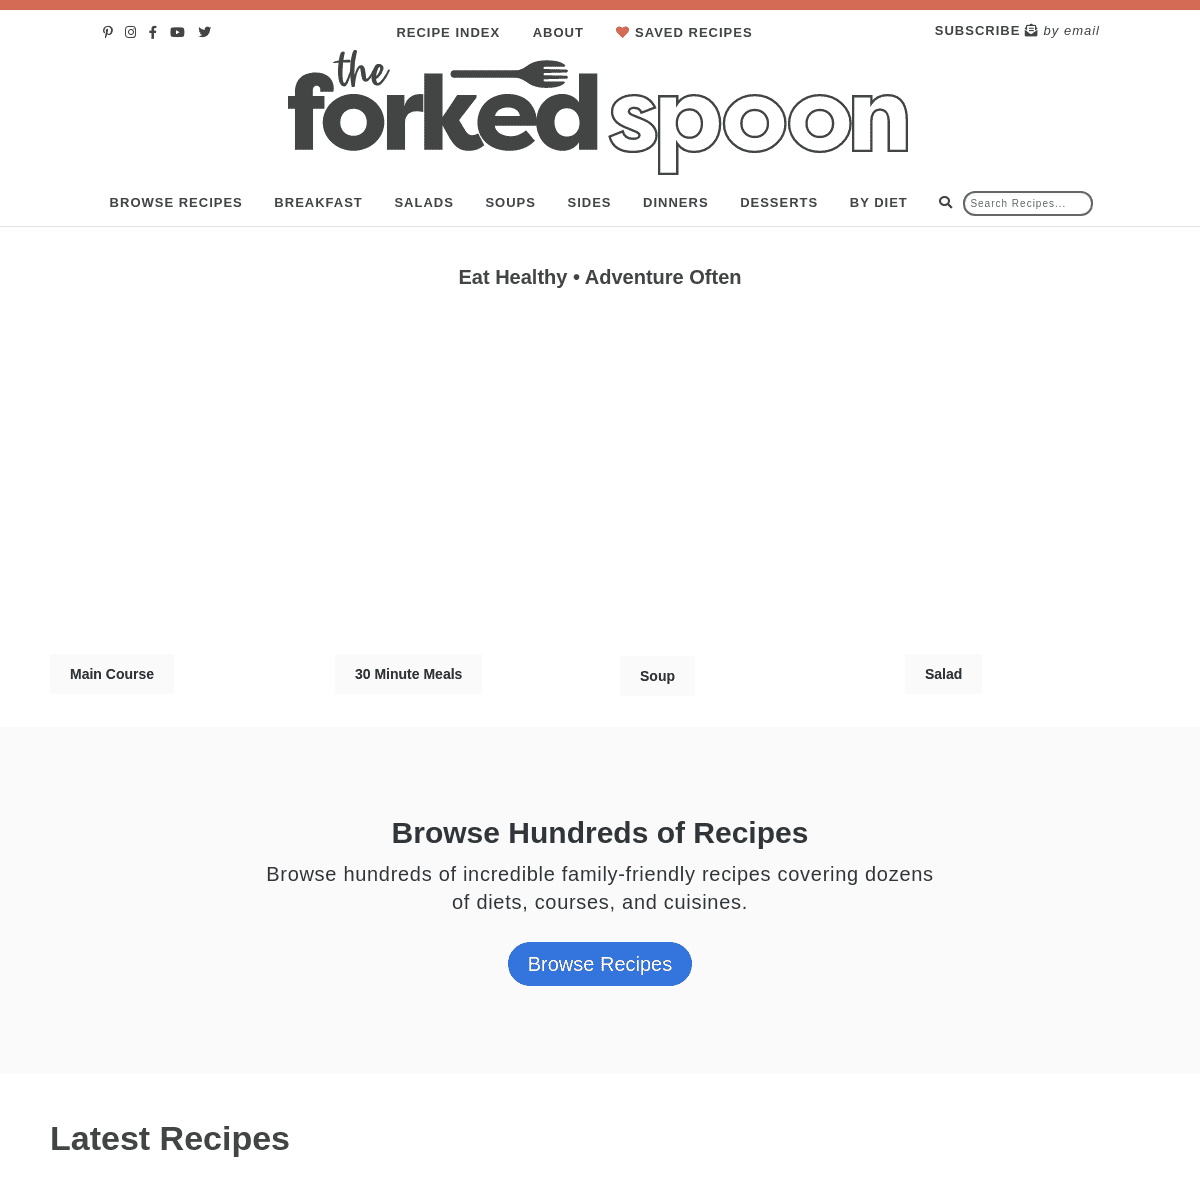 A complete backup of https://theforkedspoon.com